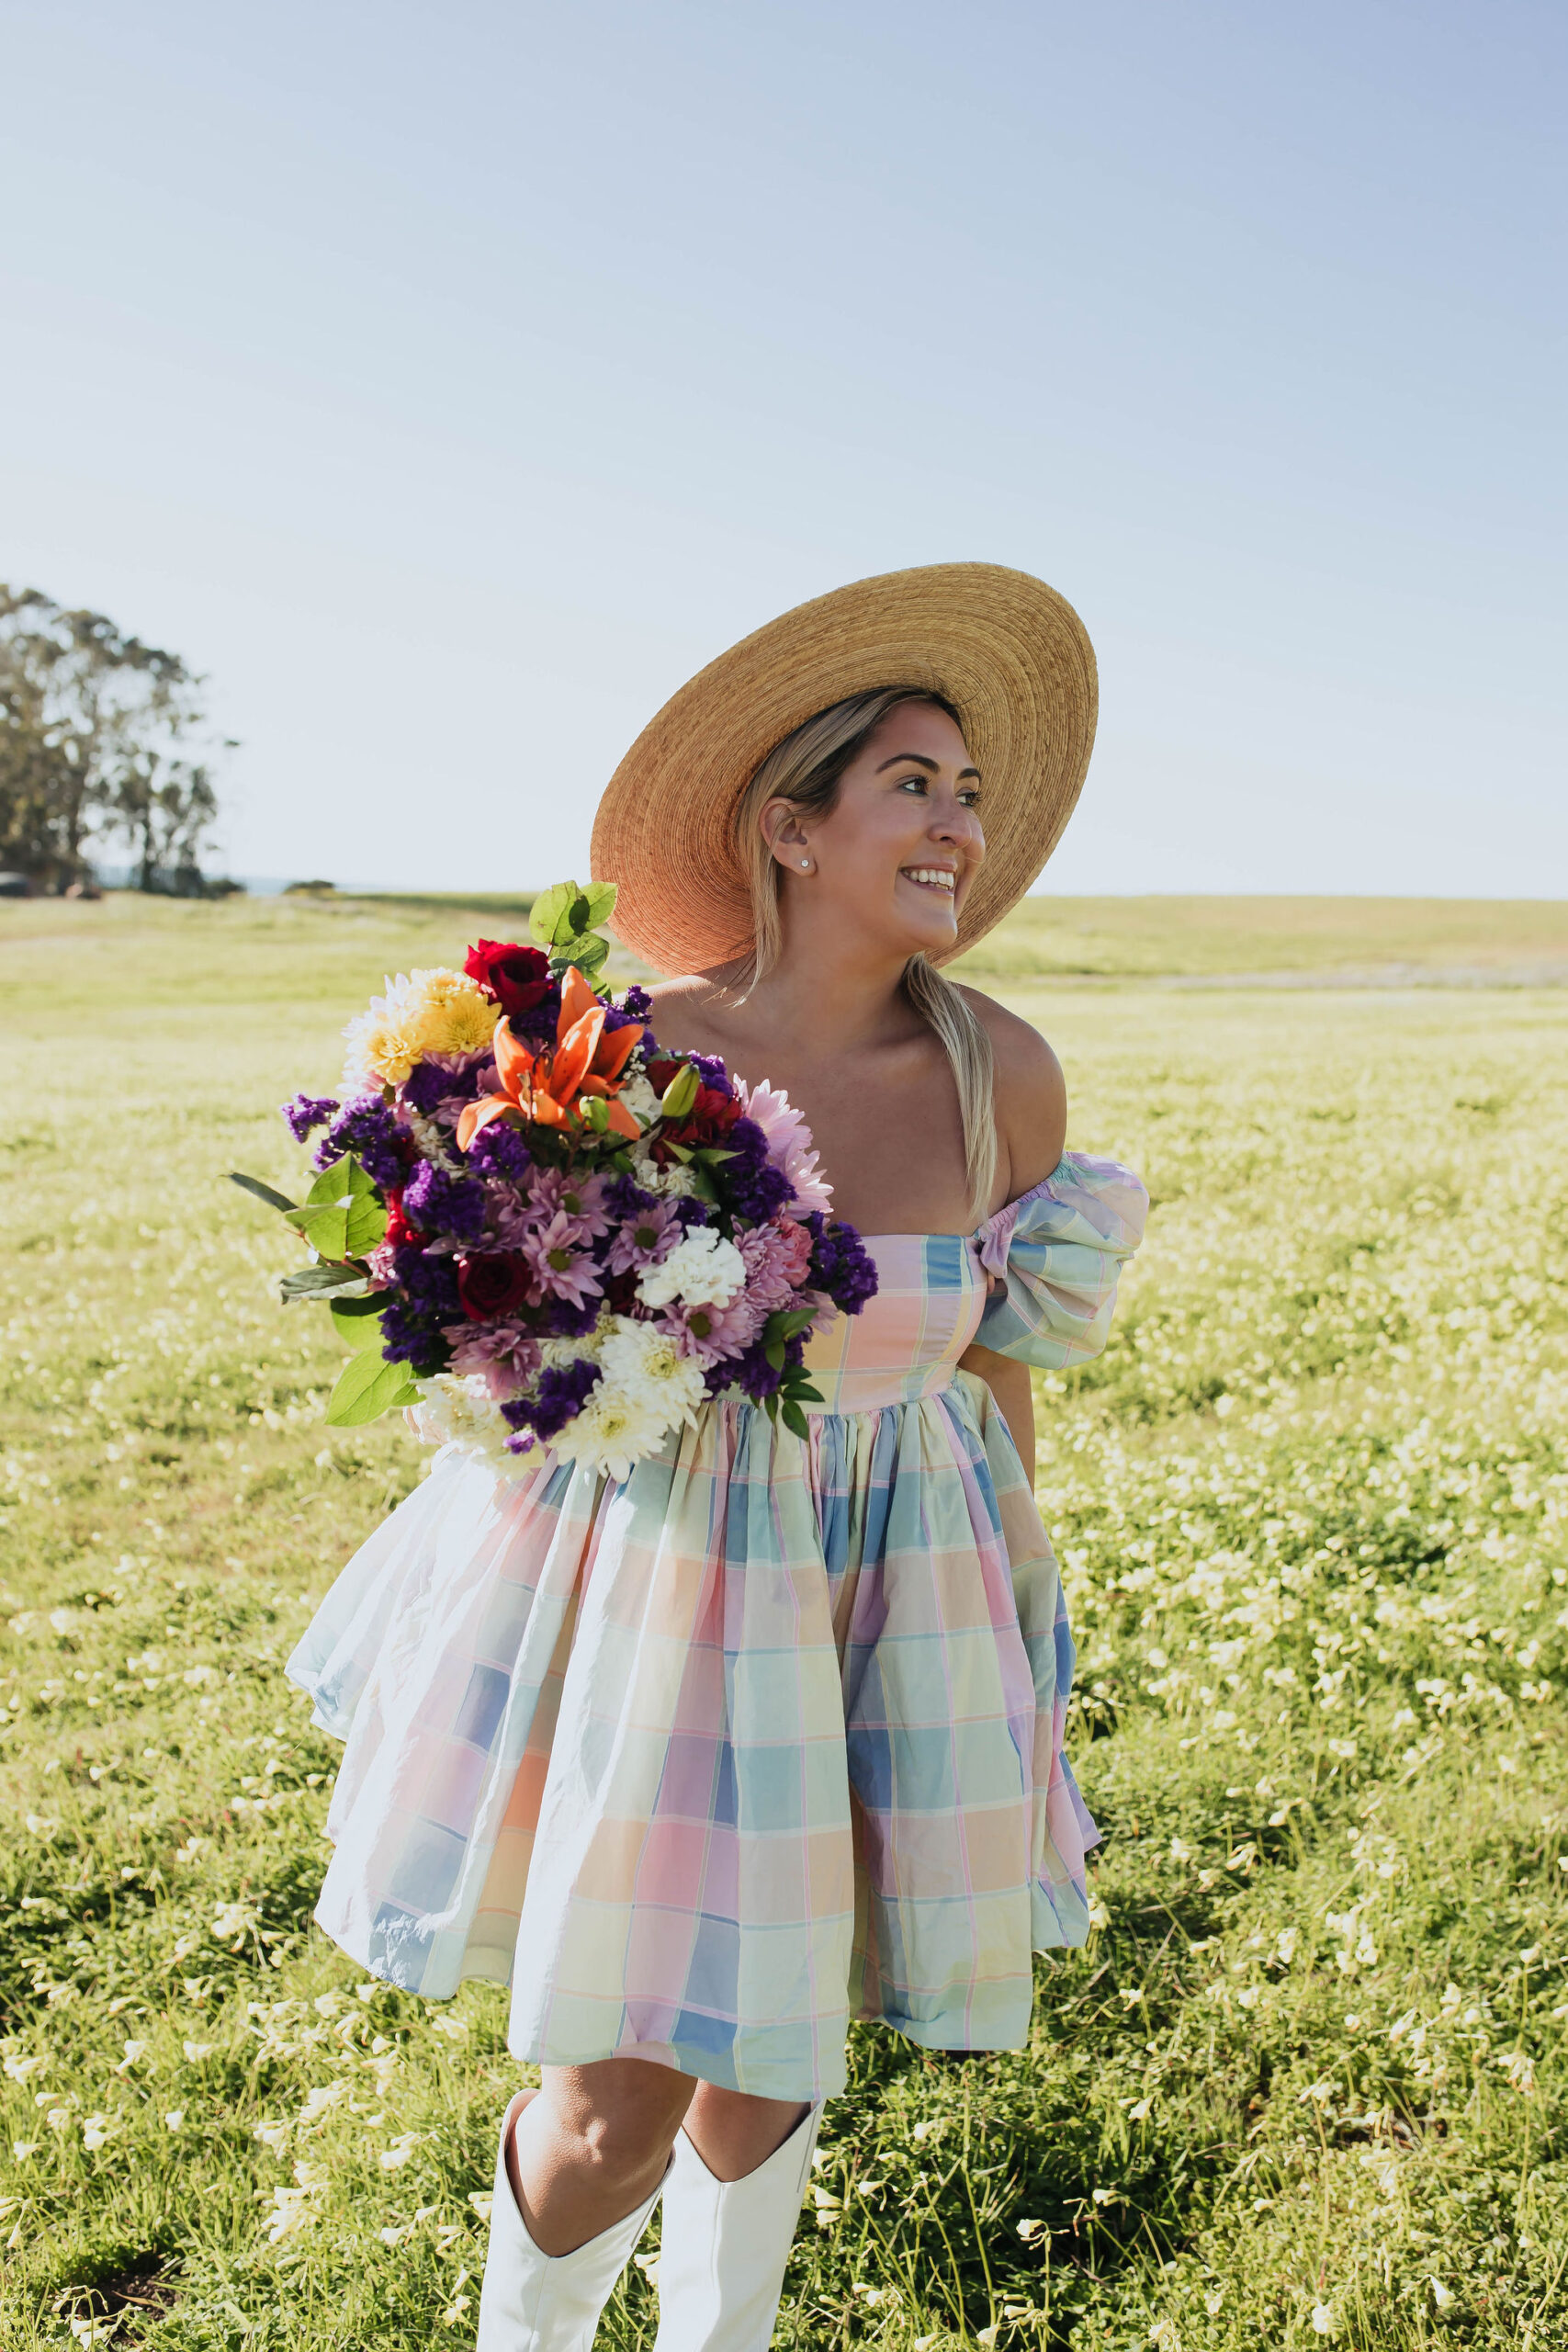 SELKIE Puff Dress Sizing and Styling